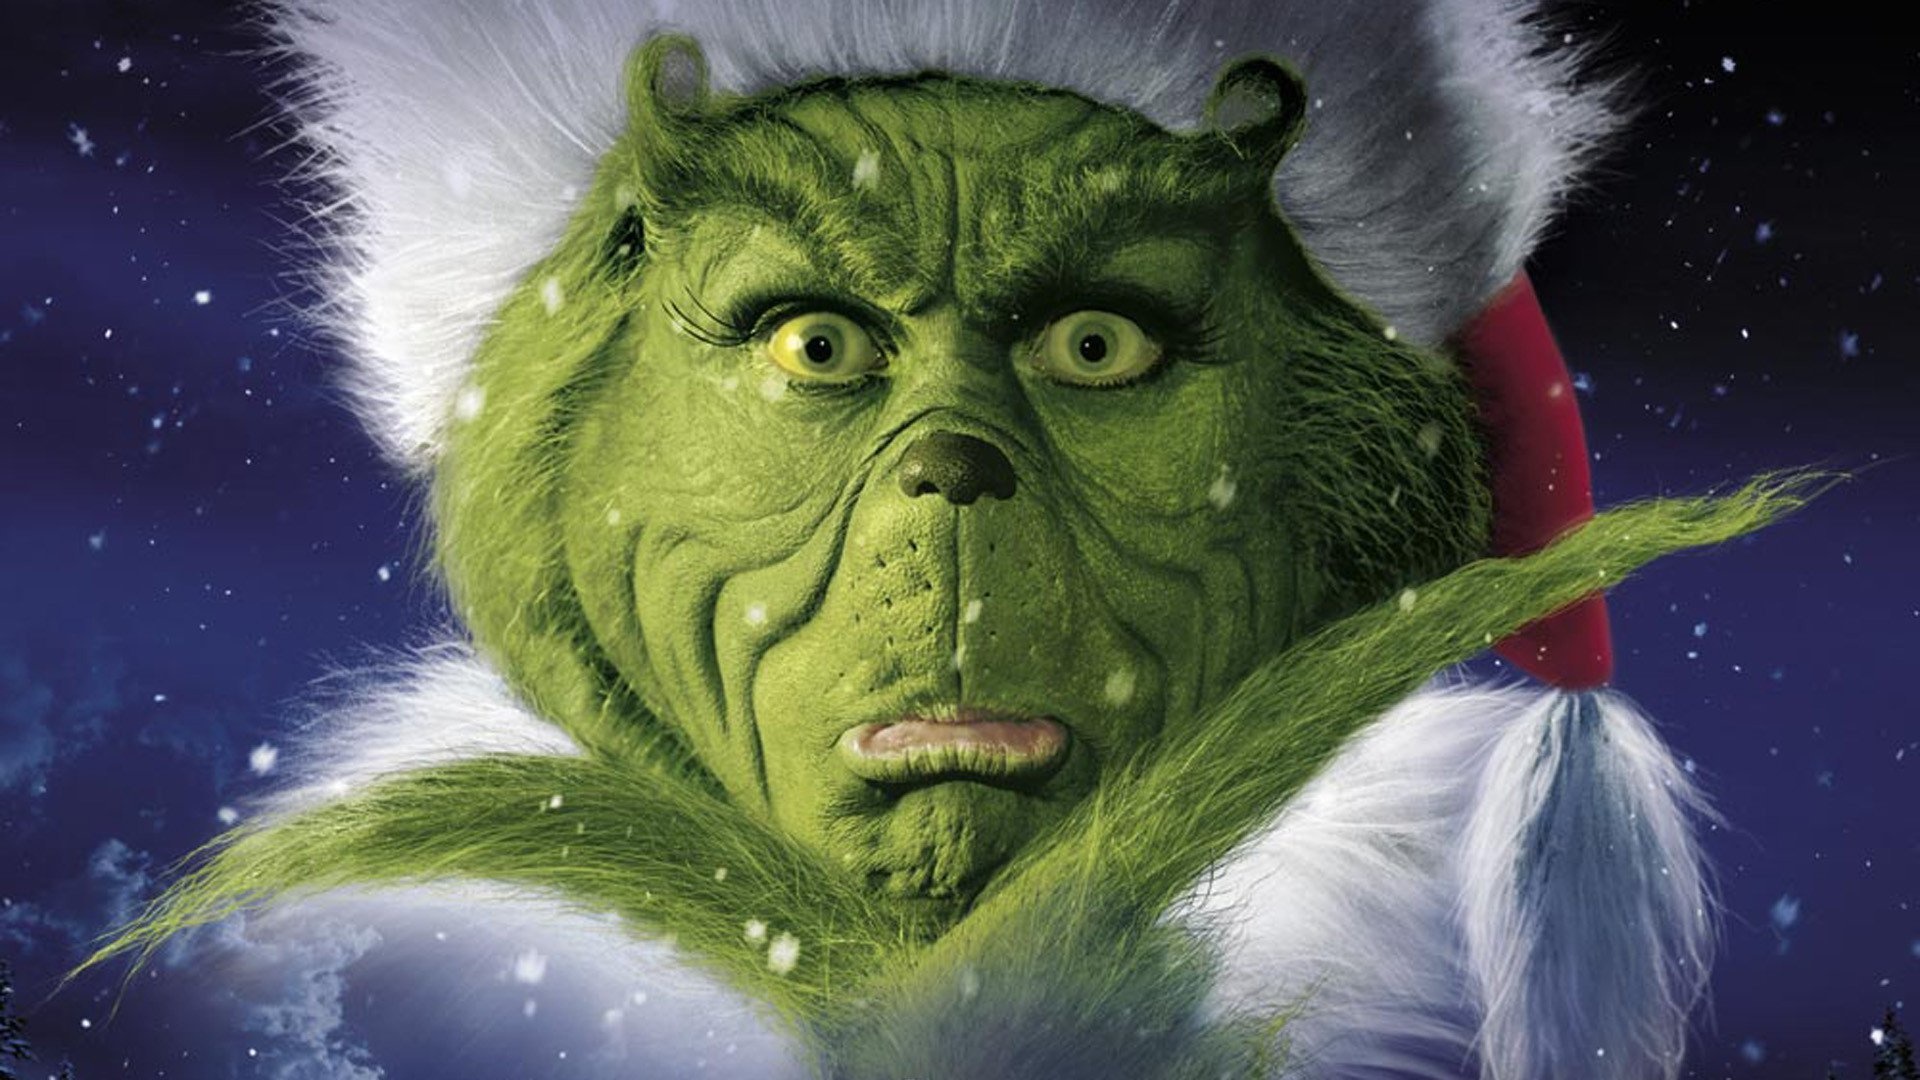 Movie poster How the Grinch Stole Christmas